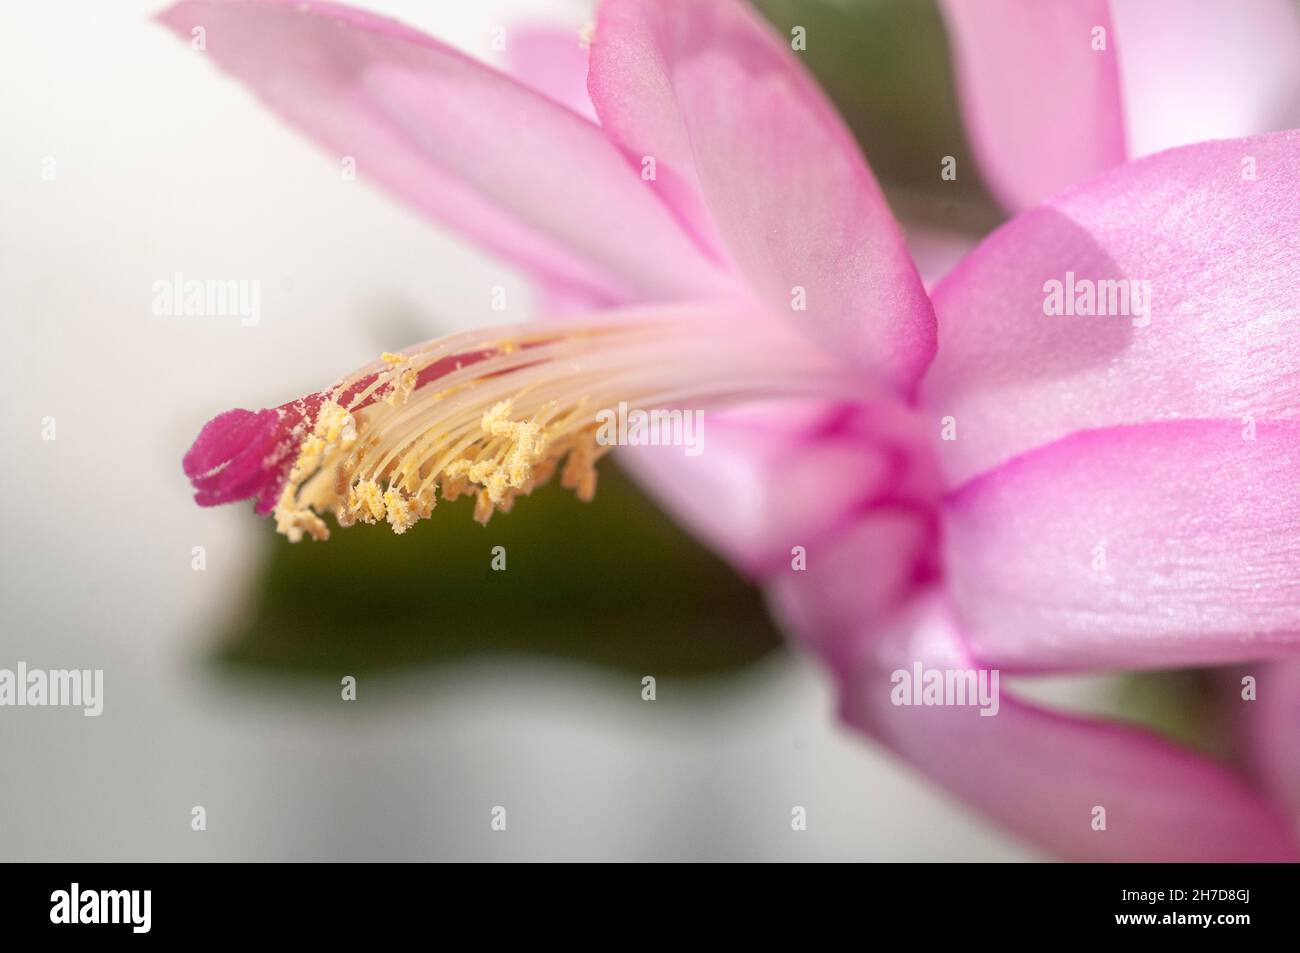 Selective focus close up of a flowering Christmas cactus flower (Schlumbergera bridgesii). This cactus is found in the Organ Mountain forests, north o Stock Photo